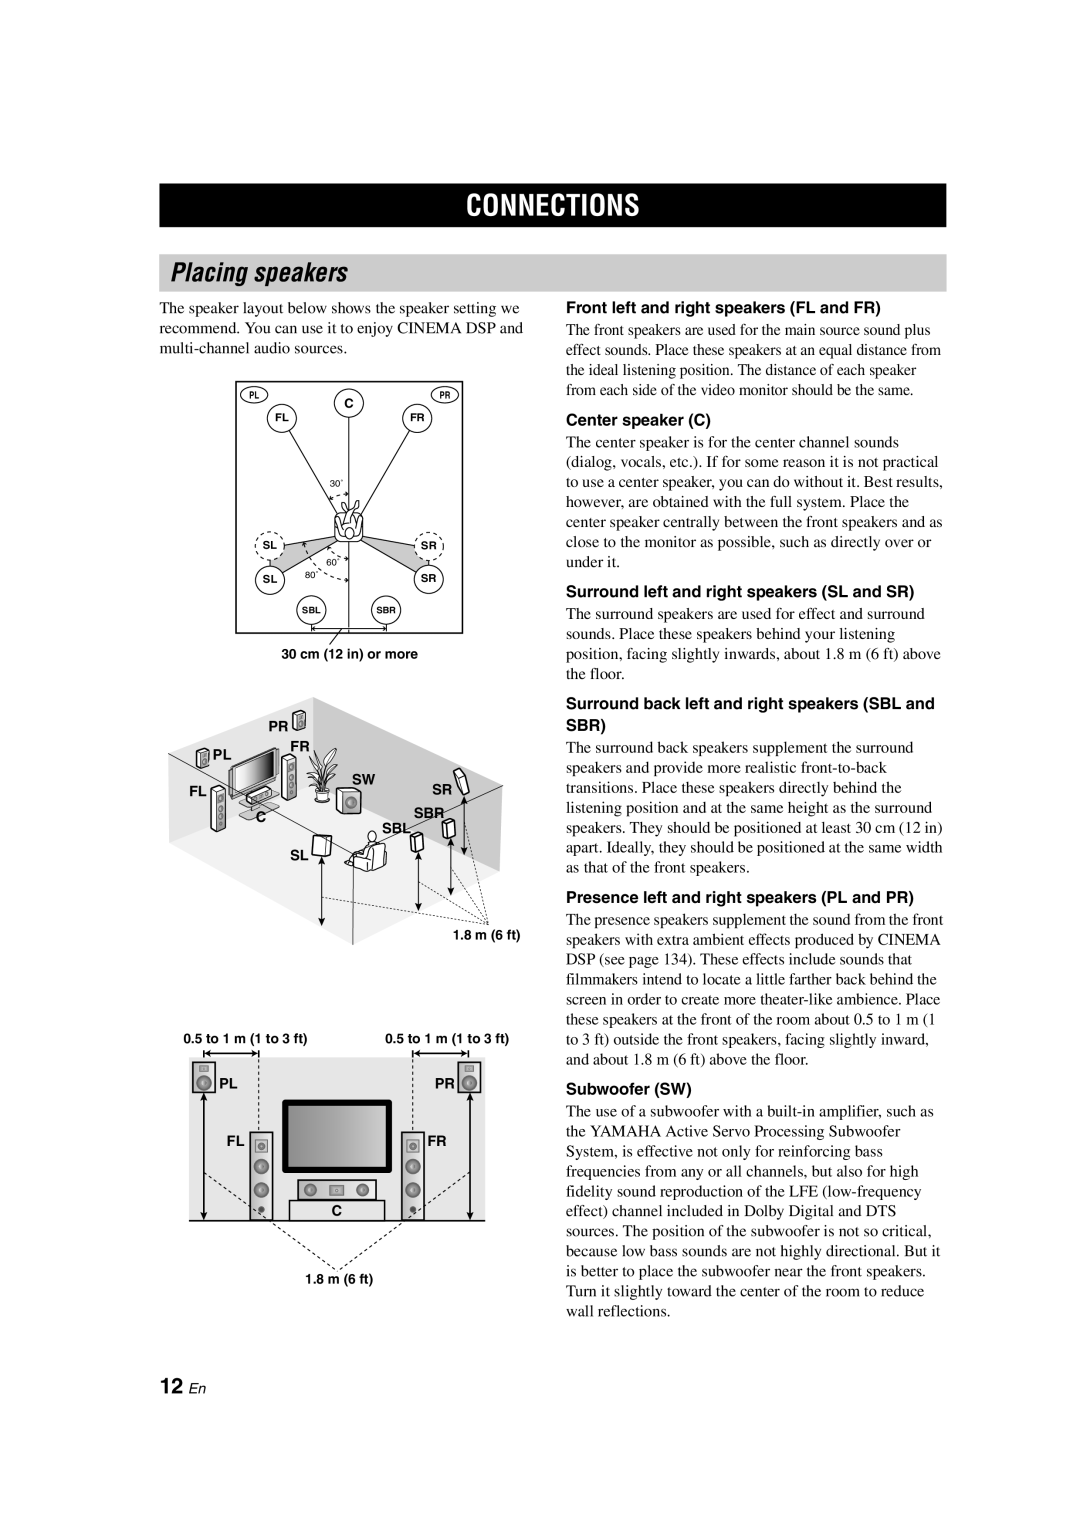 Yamaha HTR-6090 owner manual Connections, Placing speakers, 12 En 